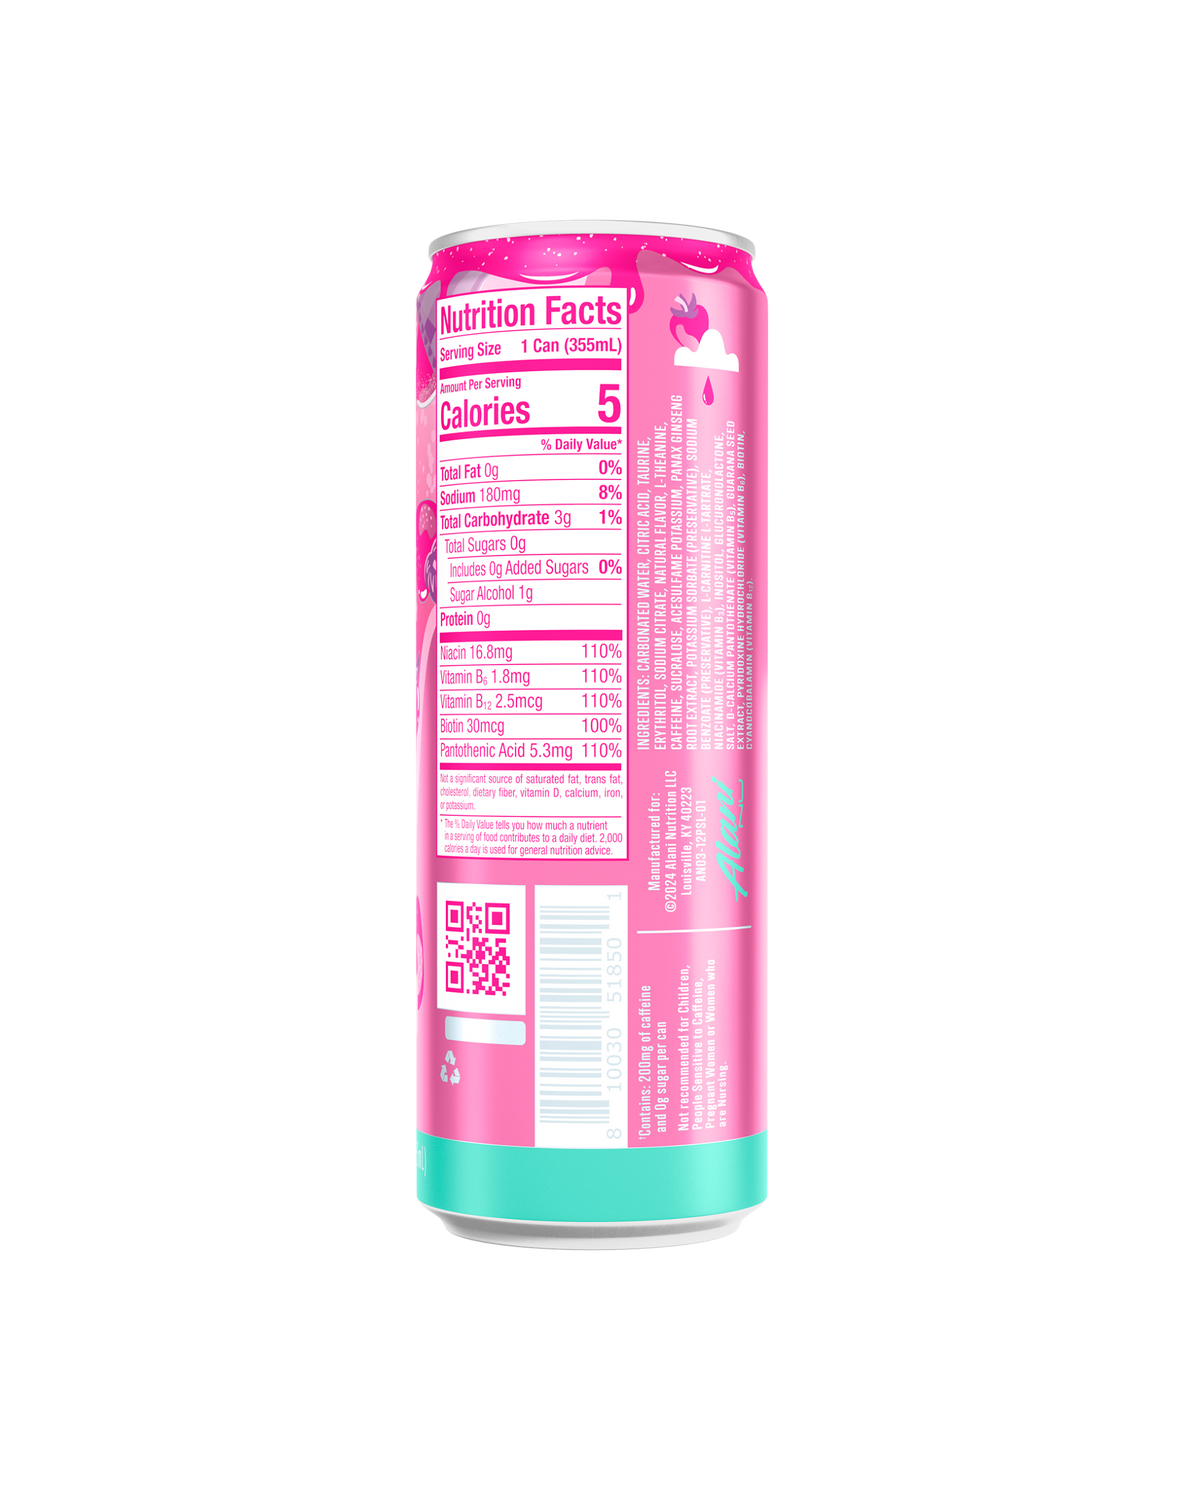 The back view of an Alani Nu Pink Slush Energy Drink can, highlighting nutrition facts.  